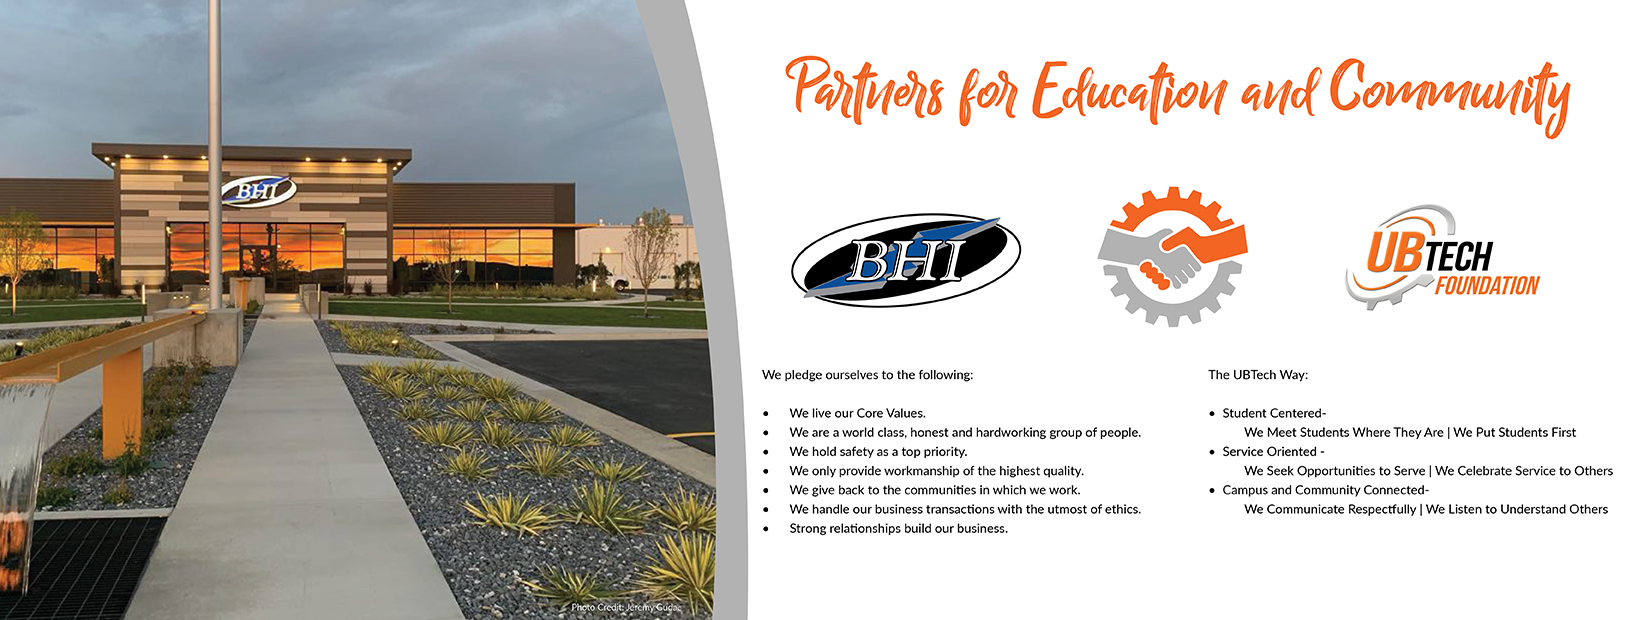 Partners for education and community: BHI and UBTech. We pledge ourselves to the following: we live our core values, we are a world class, honest, and hardworking group of people, we hold safety as a top priority, we only provide workmanship of the highest quality, we give back to the communities in which we work, we handle our business transactions with the utmost of ethics, strong relationships build our business. The UBTech Way: Student center- we meet students where they are and put students first. Service oriented - we seek opportunities to serve and we celebrate service to others. Campus and community connected - we communicate respectfully and listen to understand others. 